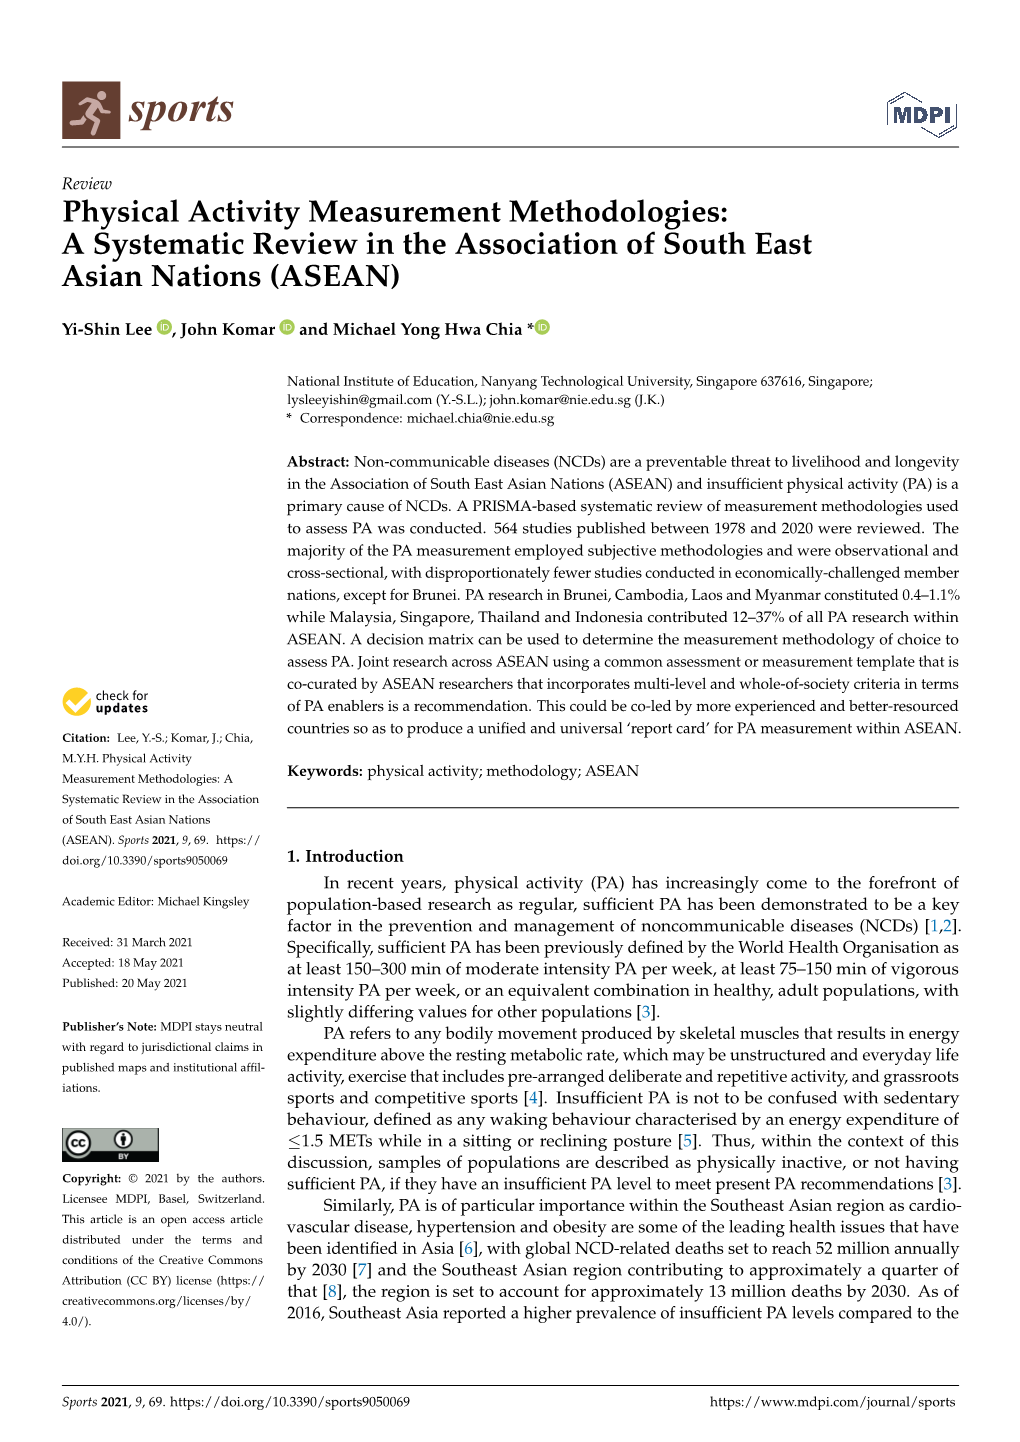 Physical Activity Measurement Methodologies: a Systematic Review in the Association of South East Asian Nations (ASEAN)